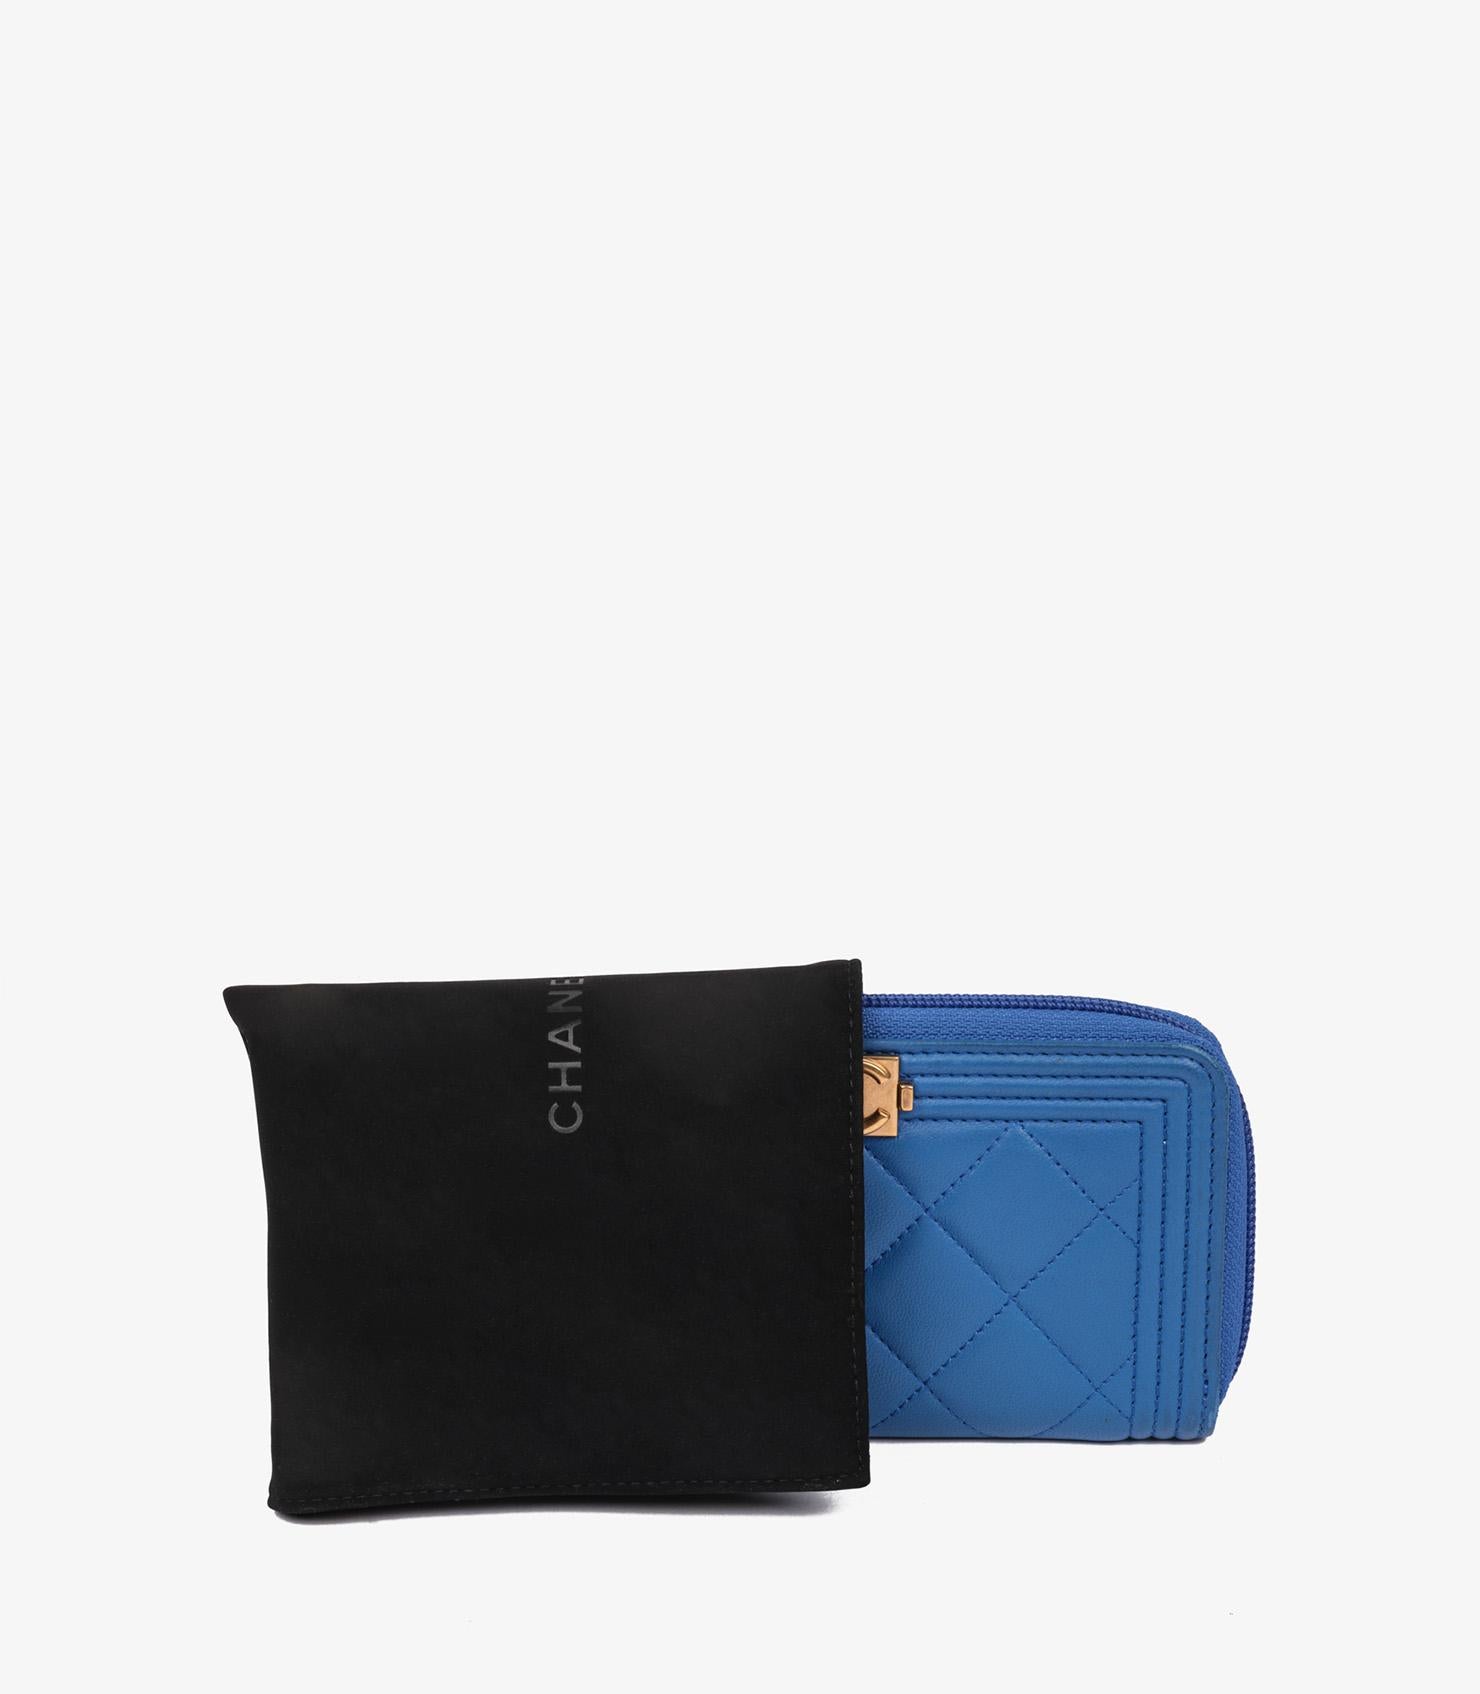 Chanel Blue Quilted Lambskin Le Boy Wallet 4